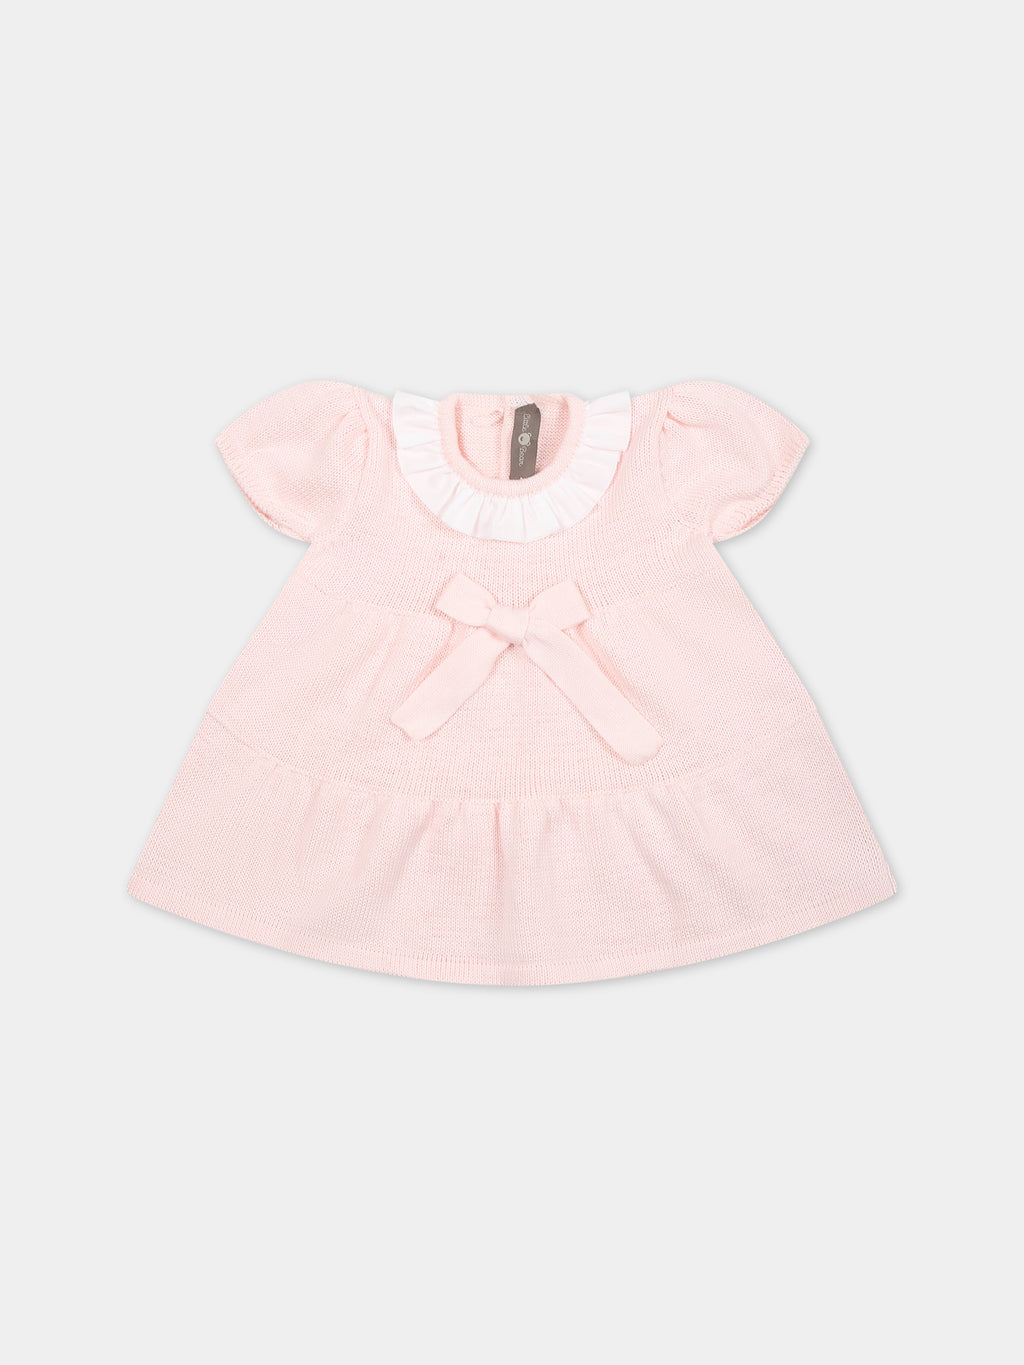 Pink casual dress for baby girl